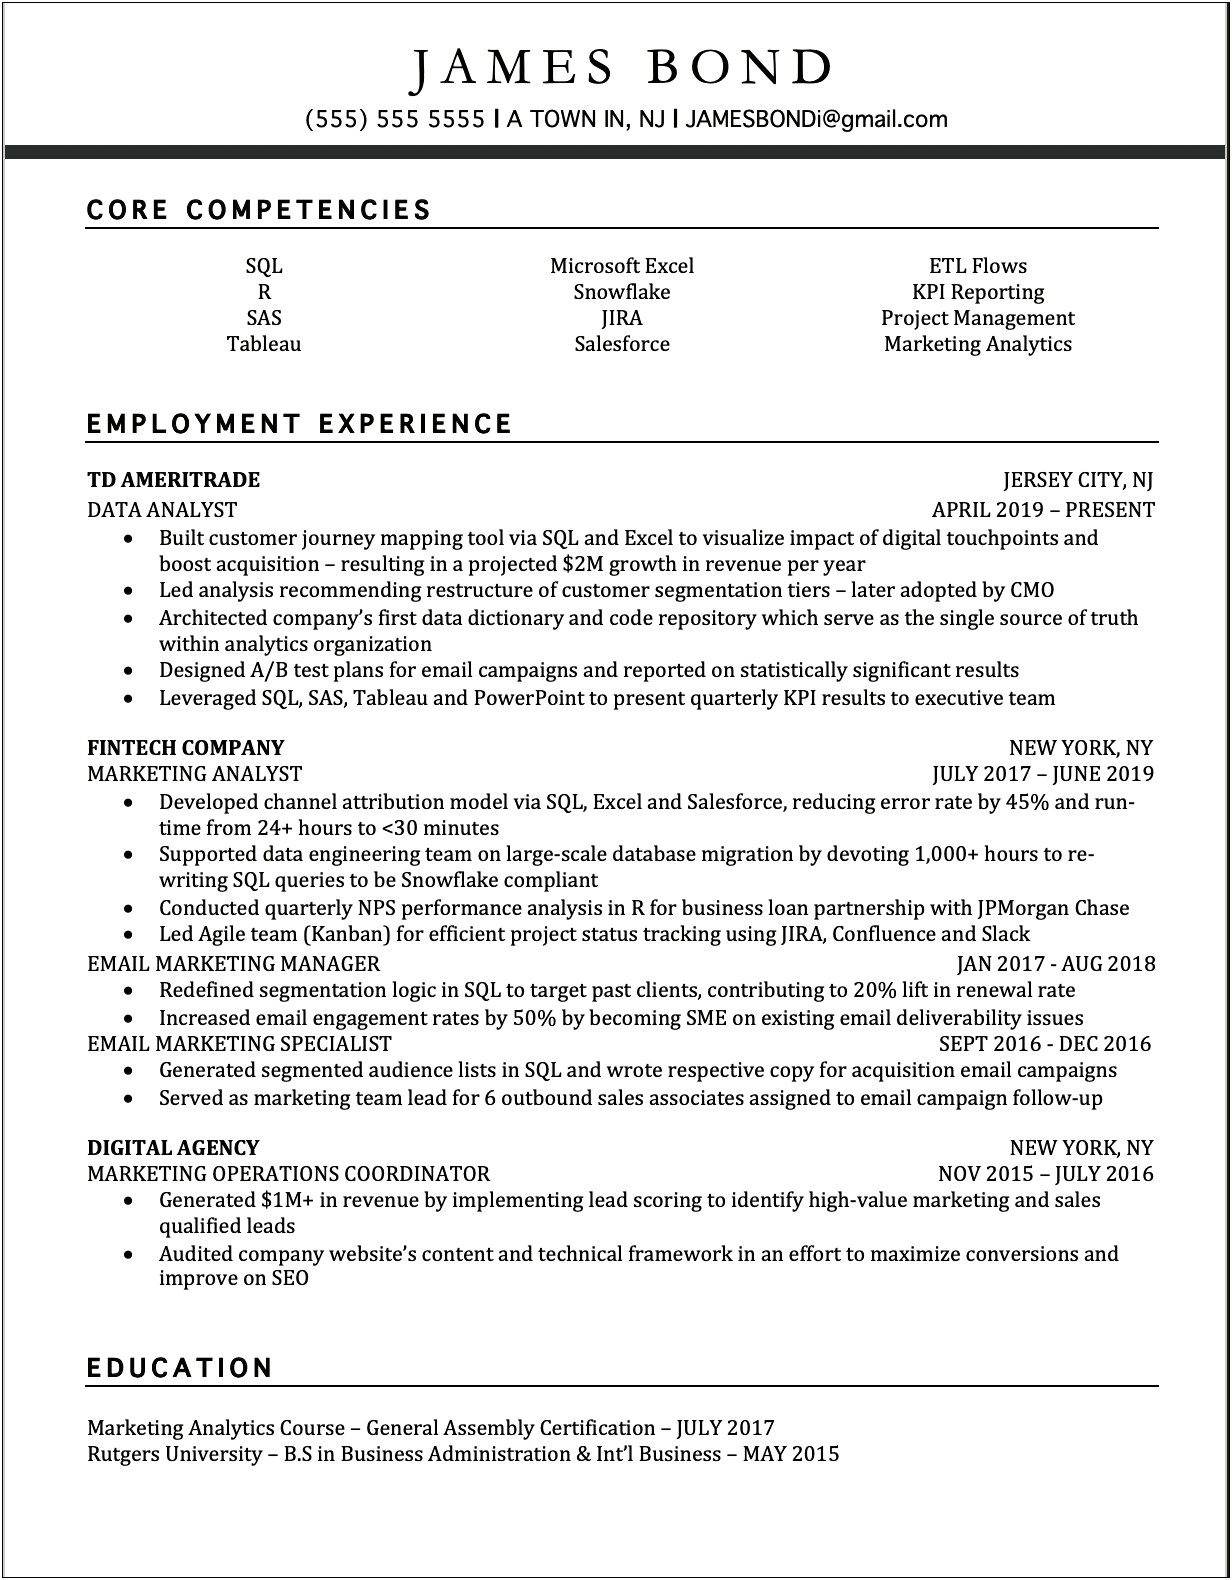 Resume For People With Multiple Jobs